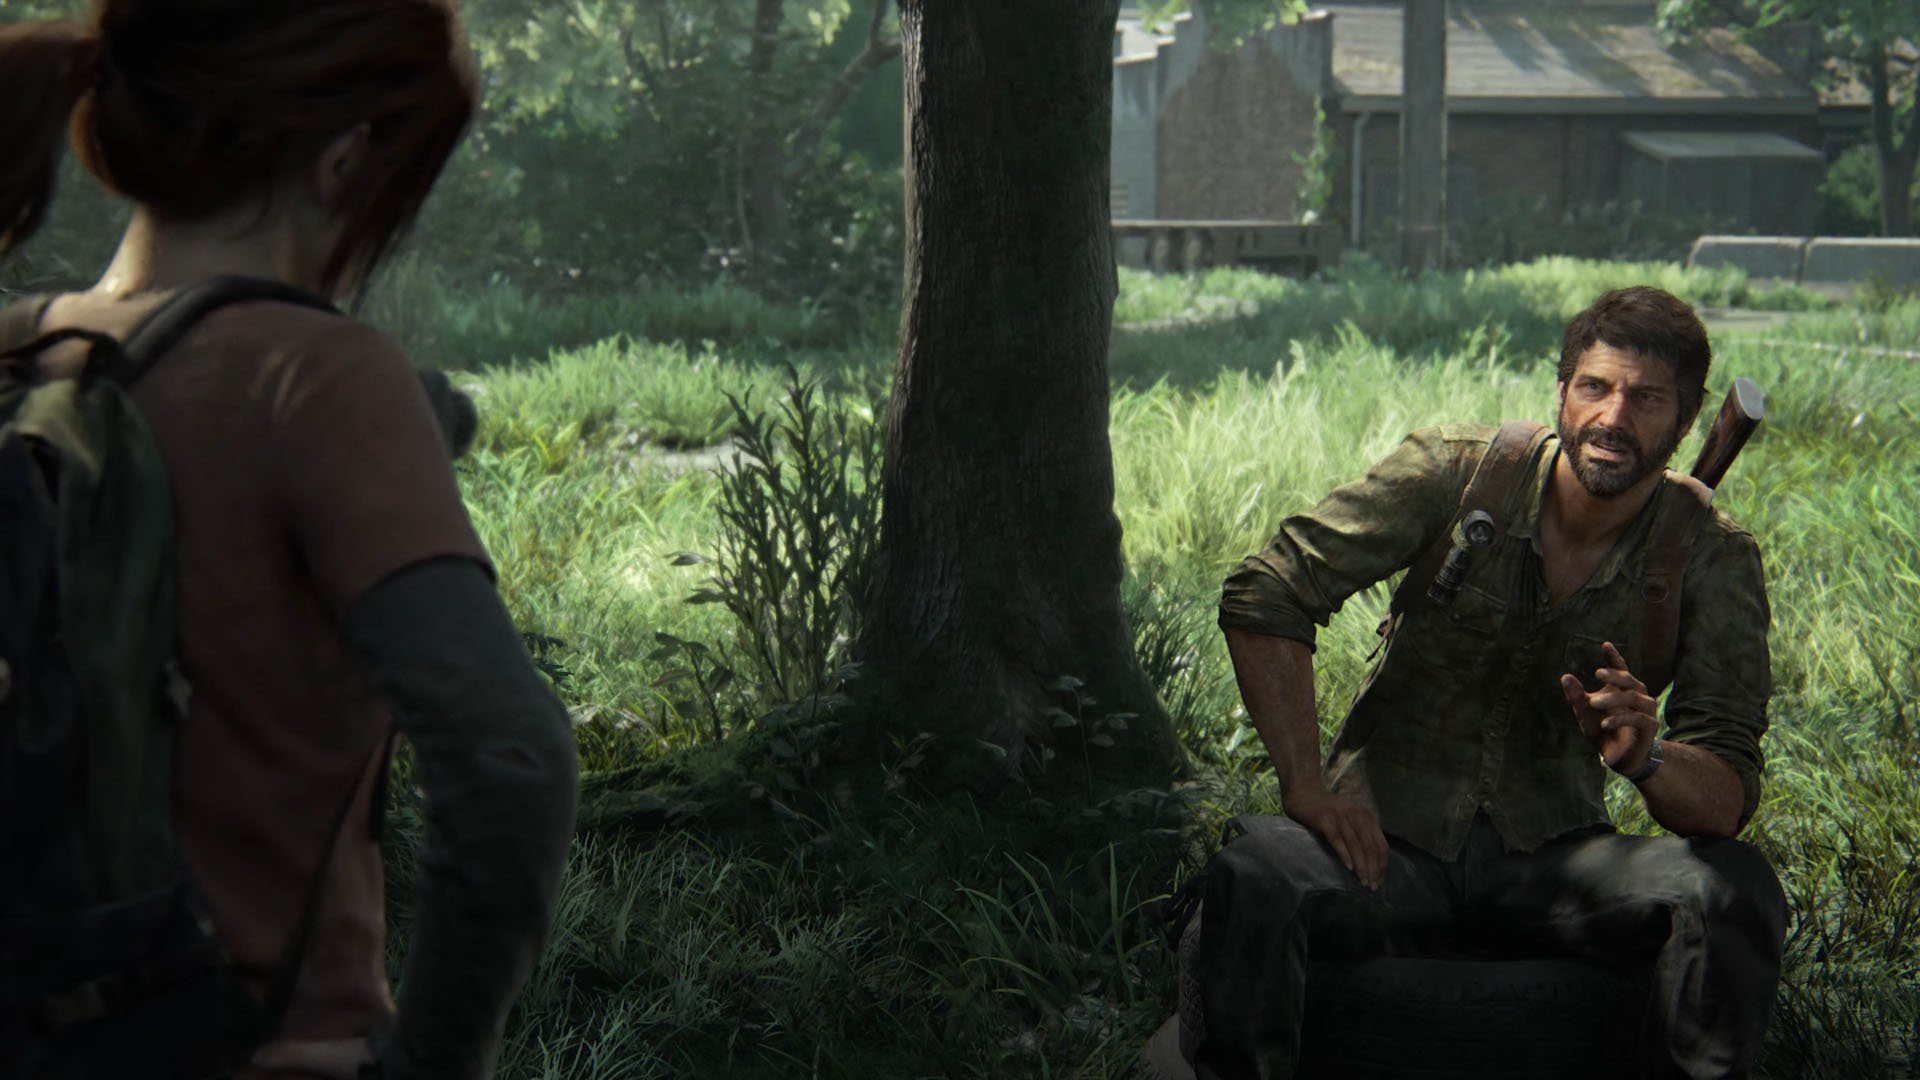 Endure and survive: 'The Last of Us' HBO series gets first trailer, Entertainment